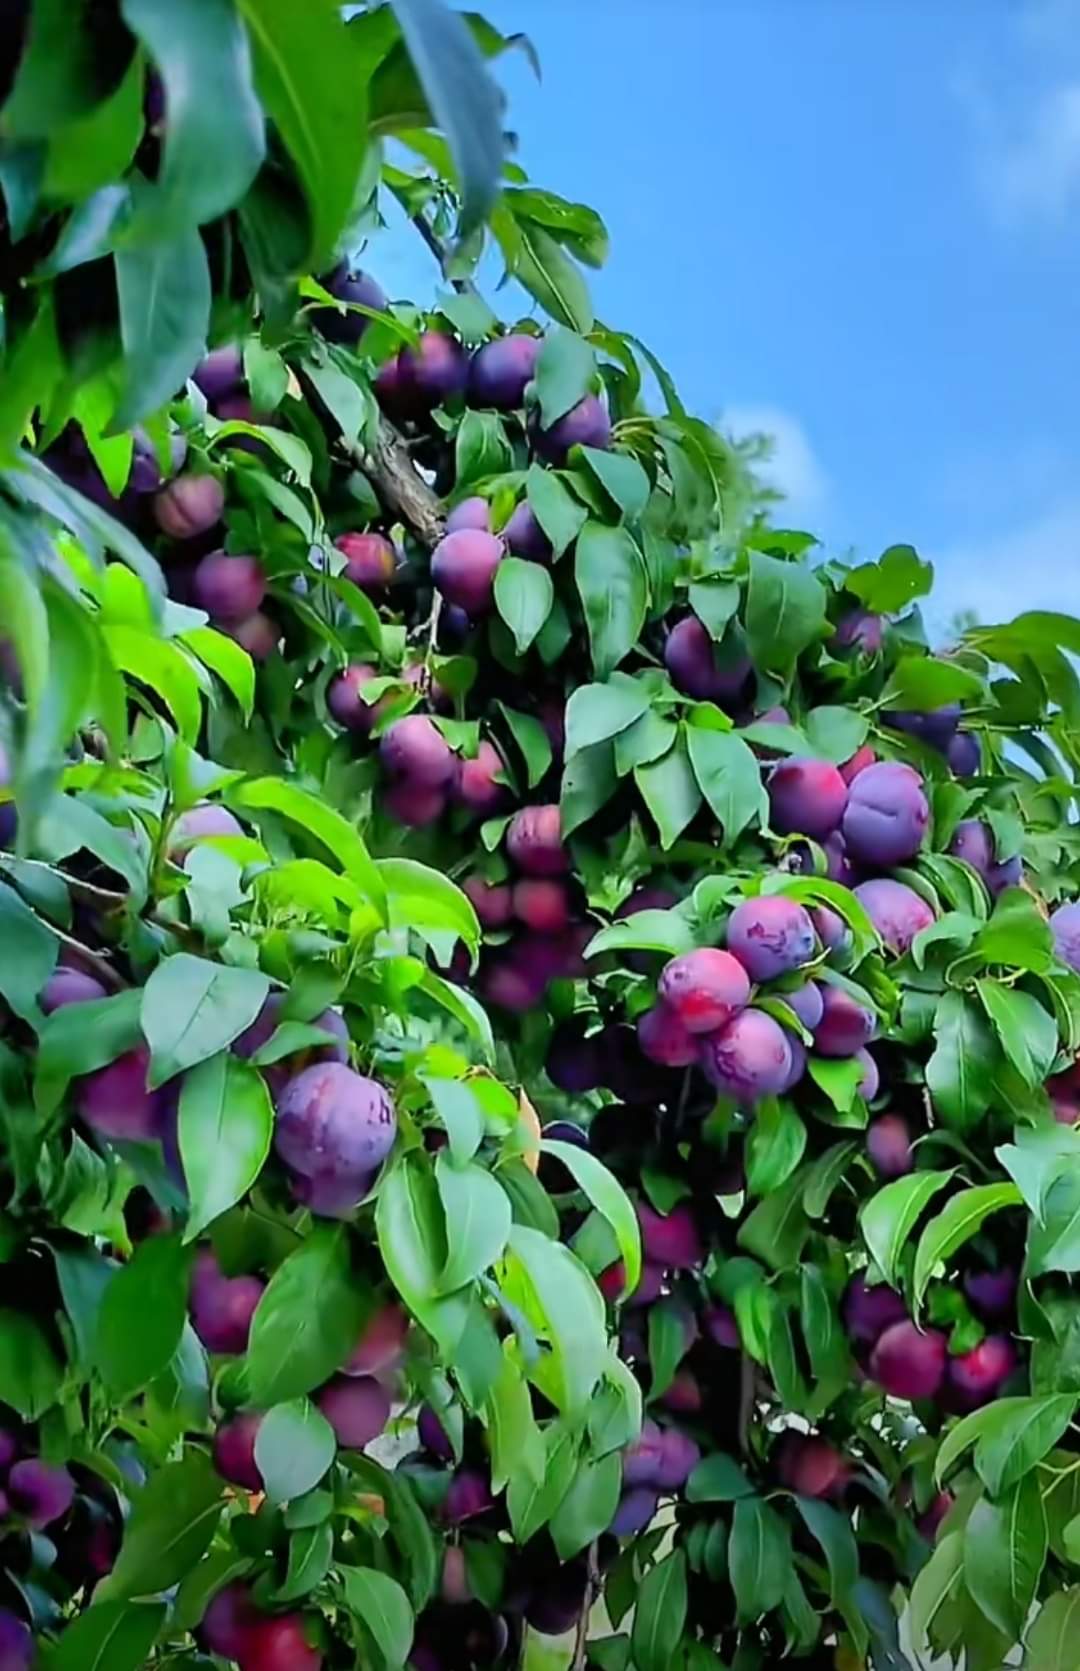 A comprehensive guide on plums growing, growing conditions, health benefits, pest and diseases as well as their control